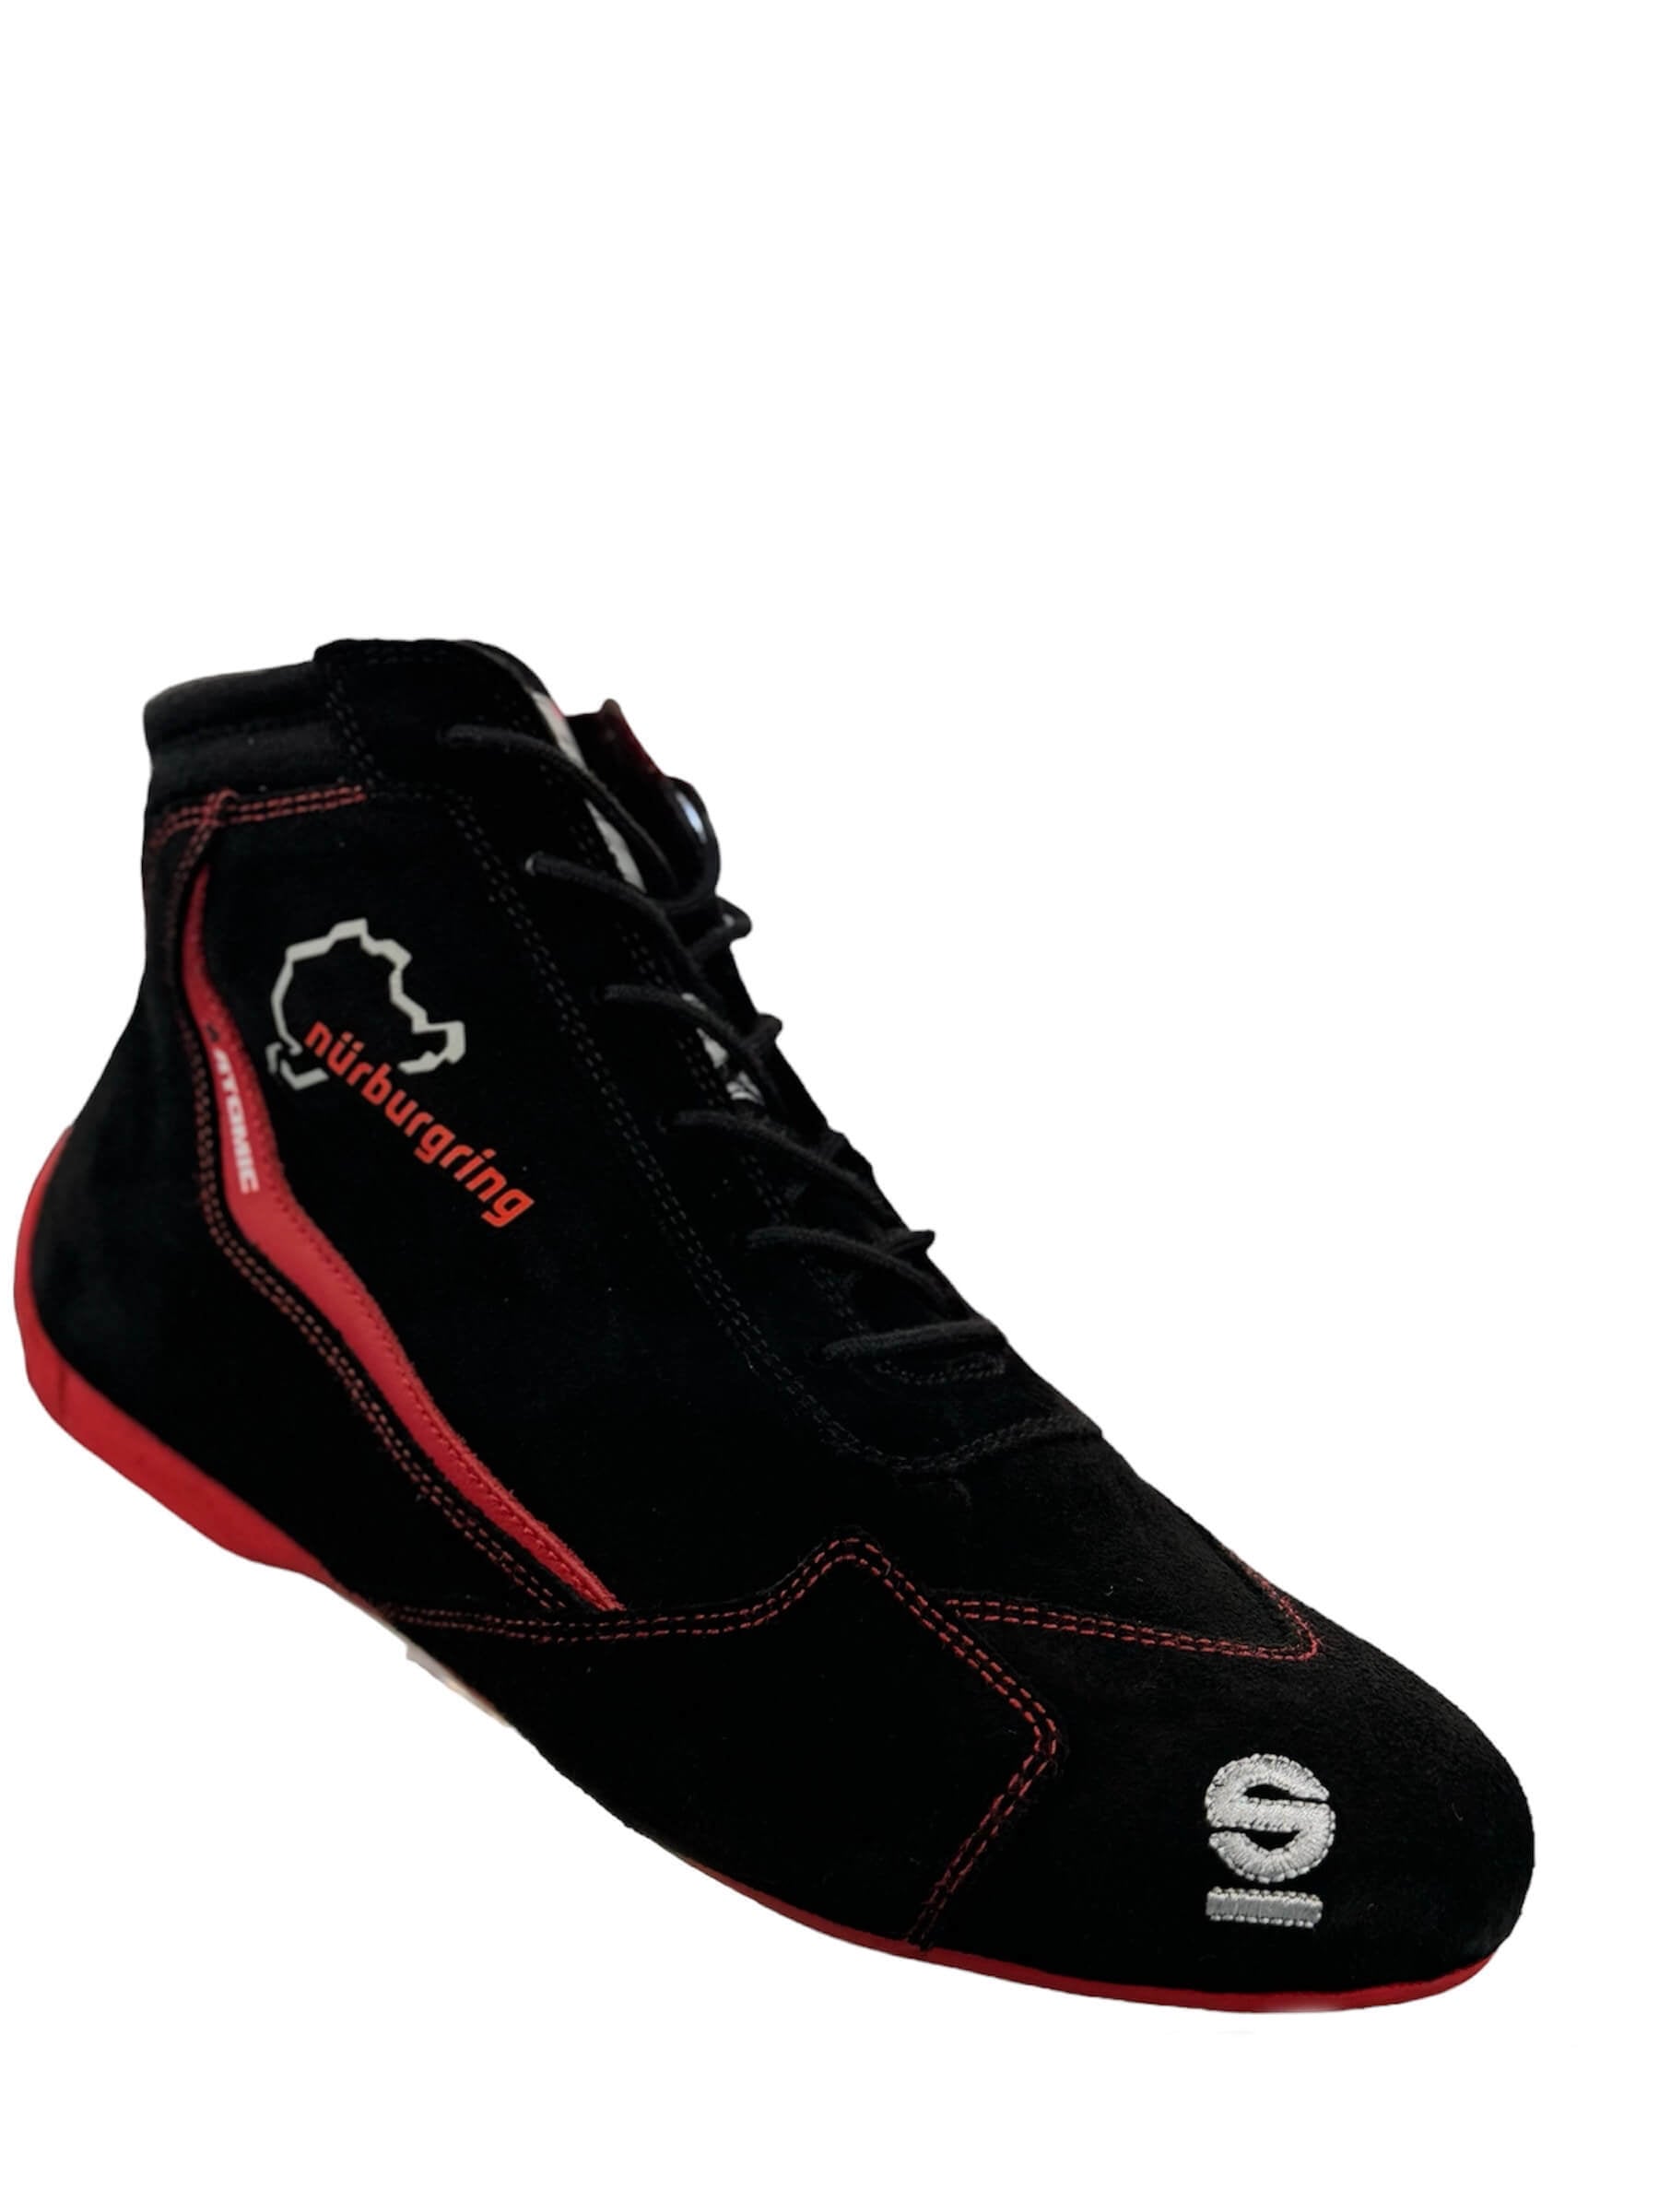 SPARCO 001295SP_NBR40 Shoes Slalom Nurburgring Edition black/red Size 40 Photo-0 